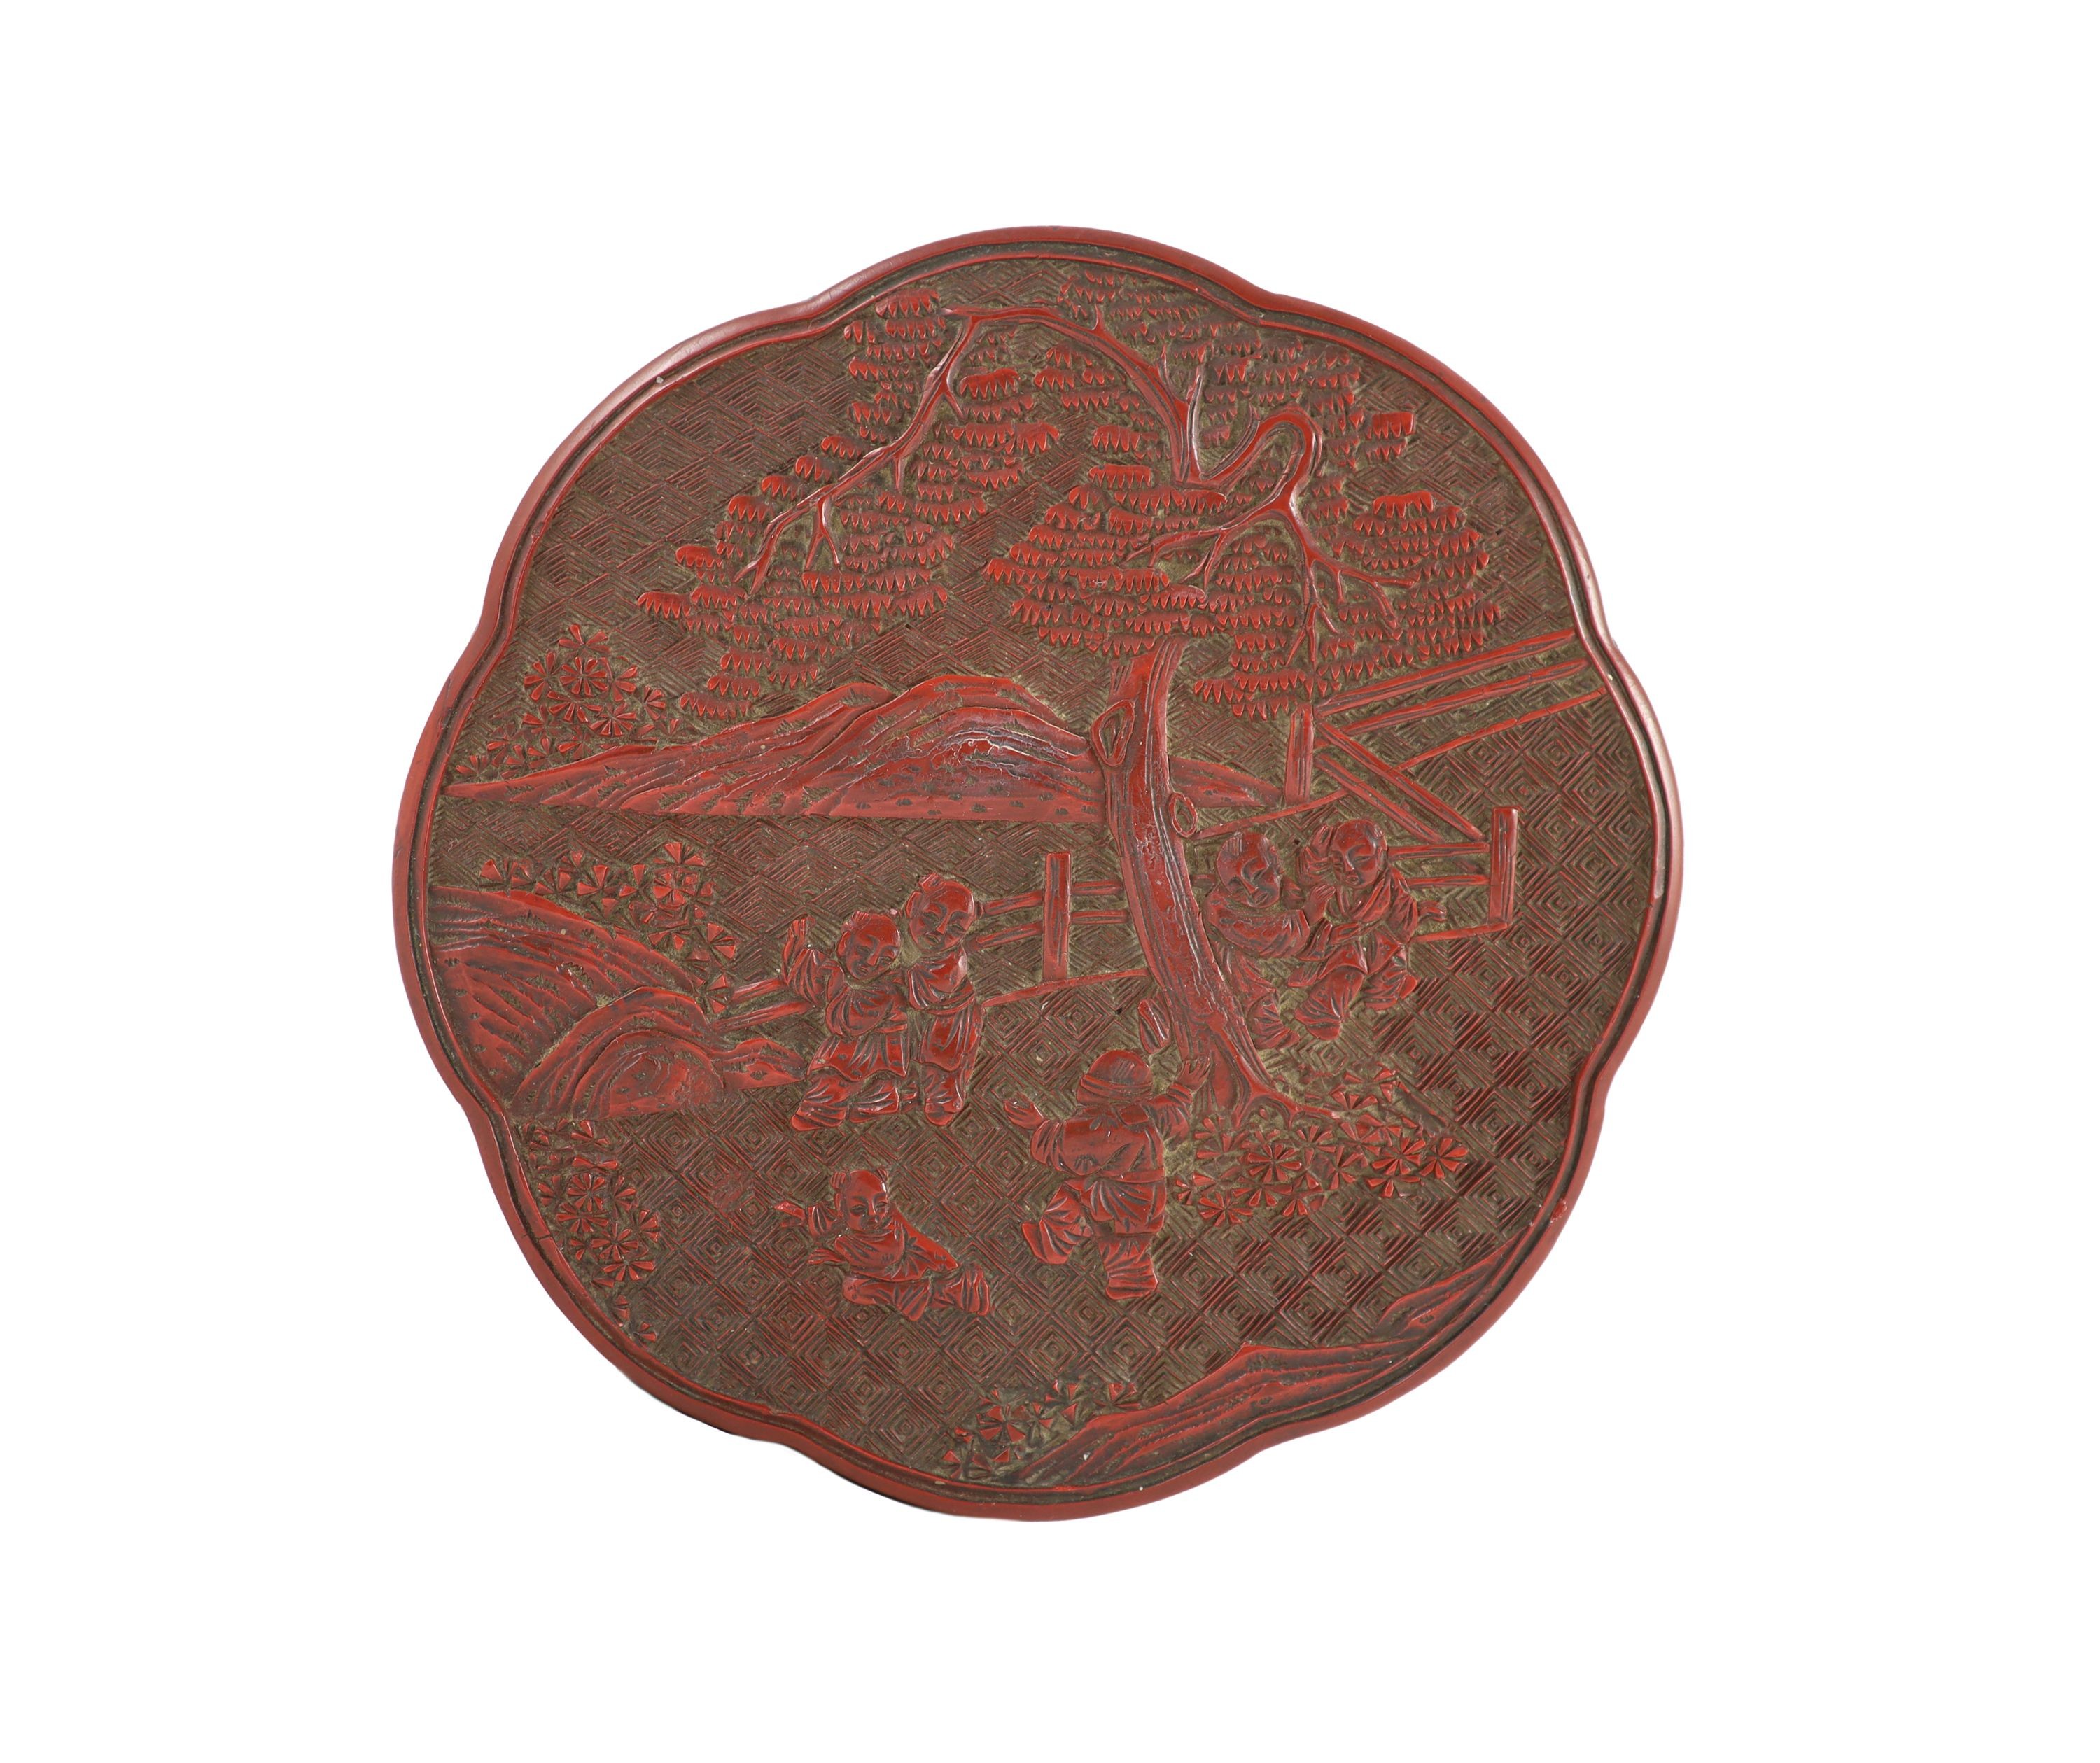 A Chinese cinnabar lacquer ‘boys’ box and cover, 19th century 13.5 cm diameter